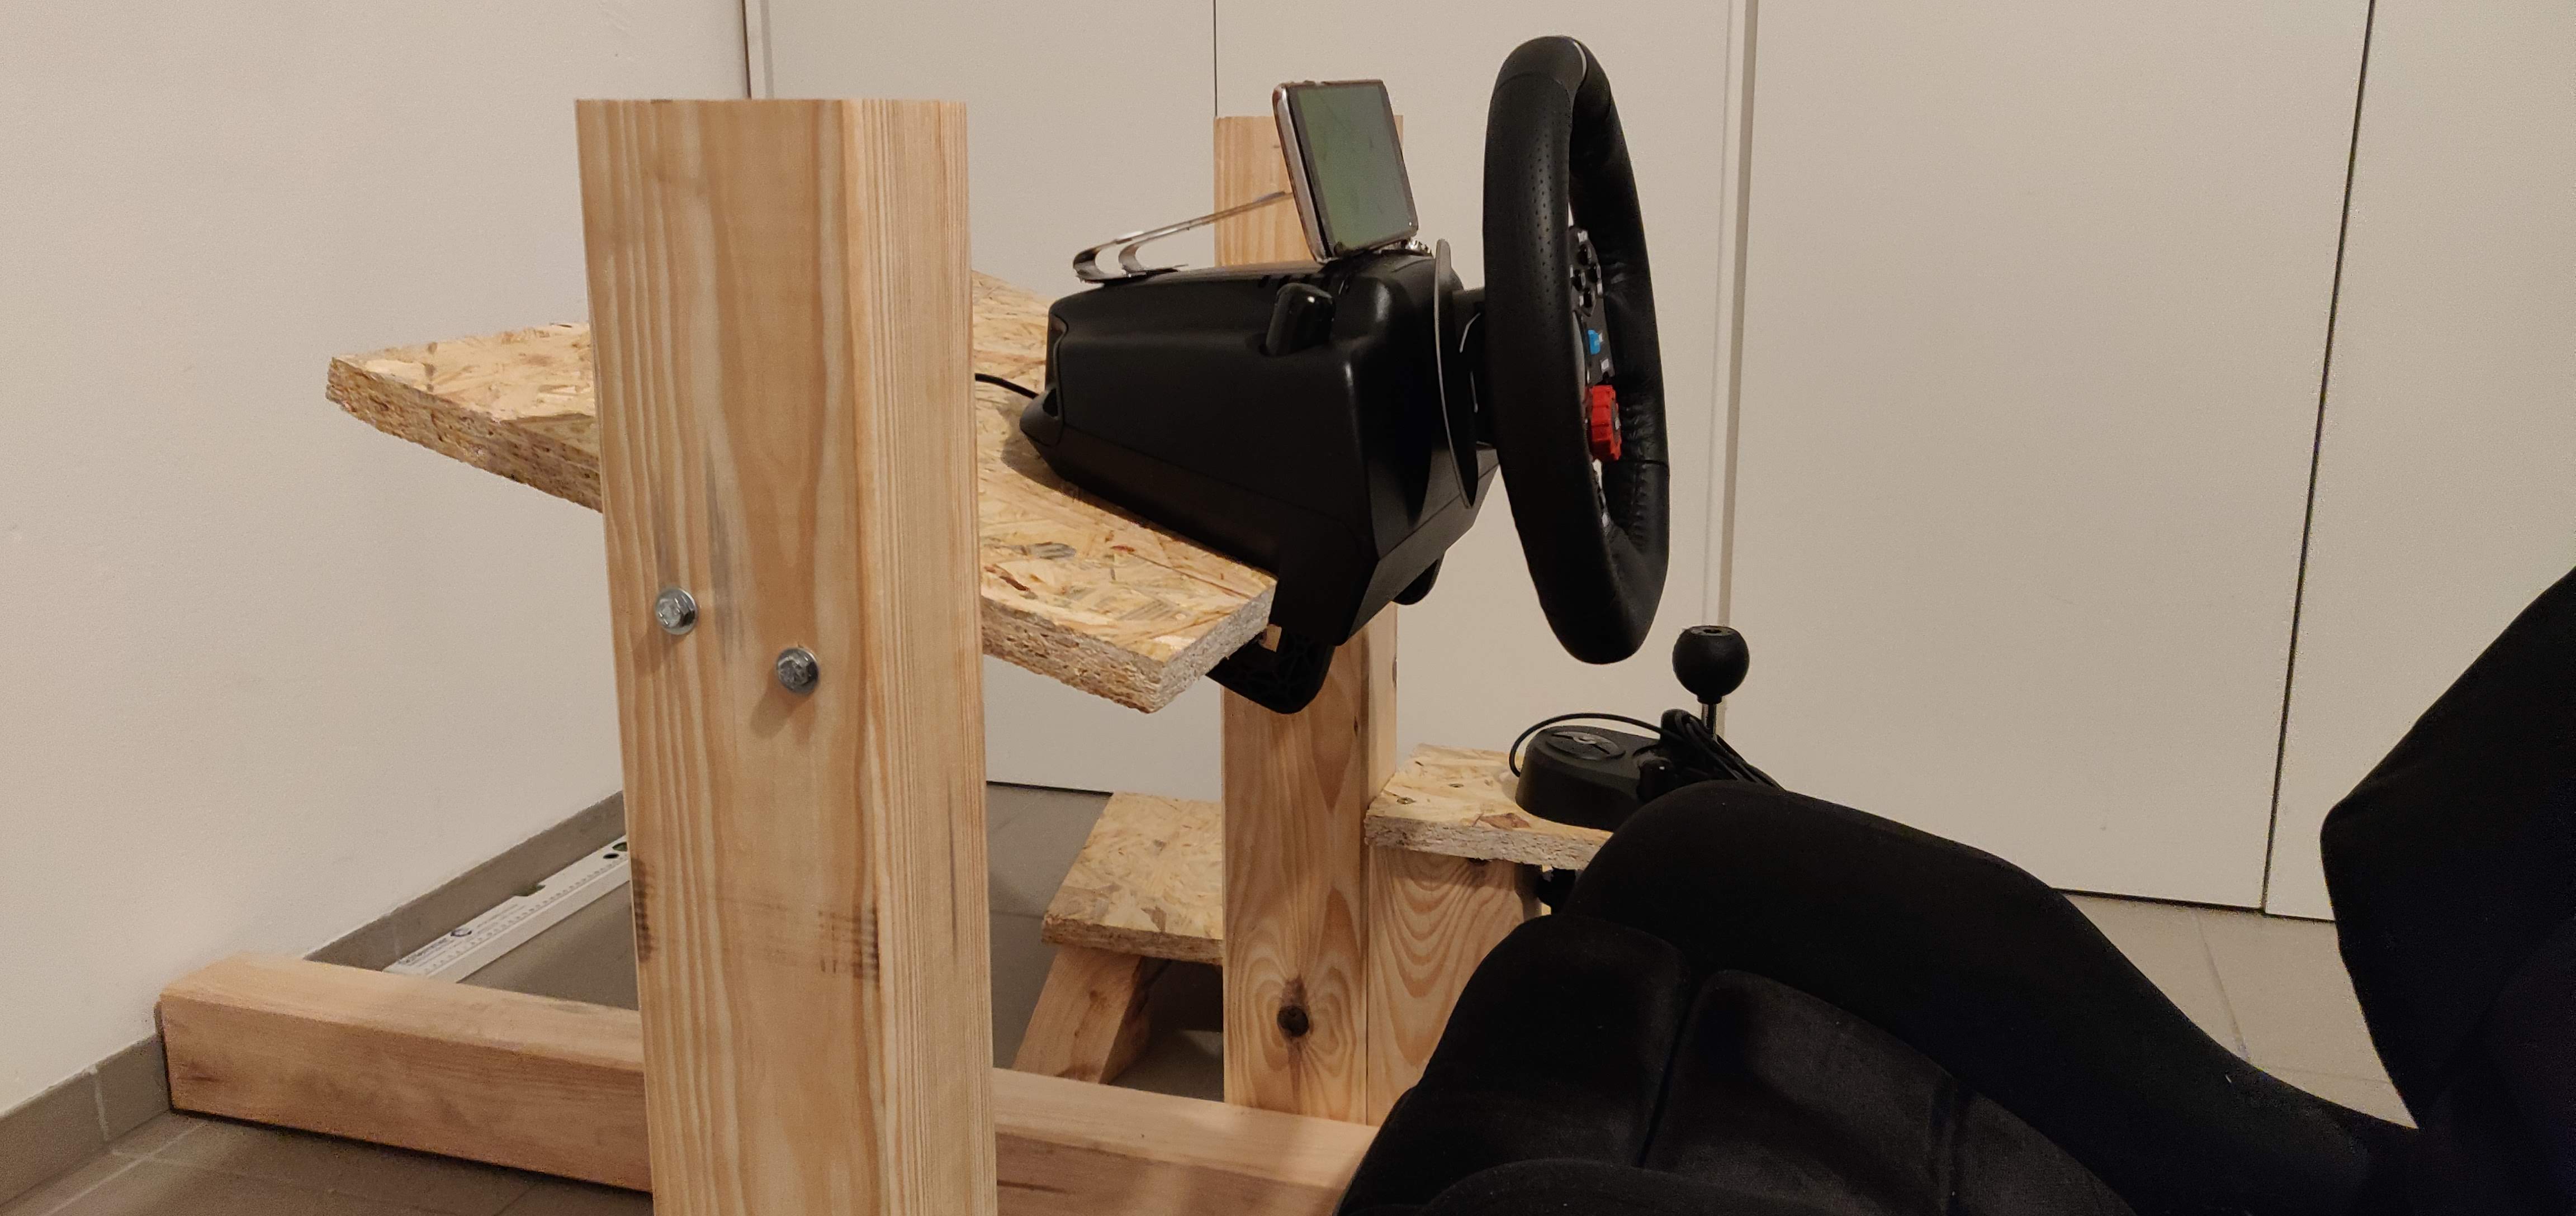 Diy Wood Sim Rig With All Components And Some Guideline Measurements Racedepartment